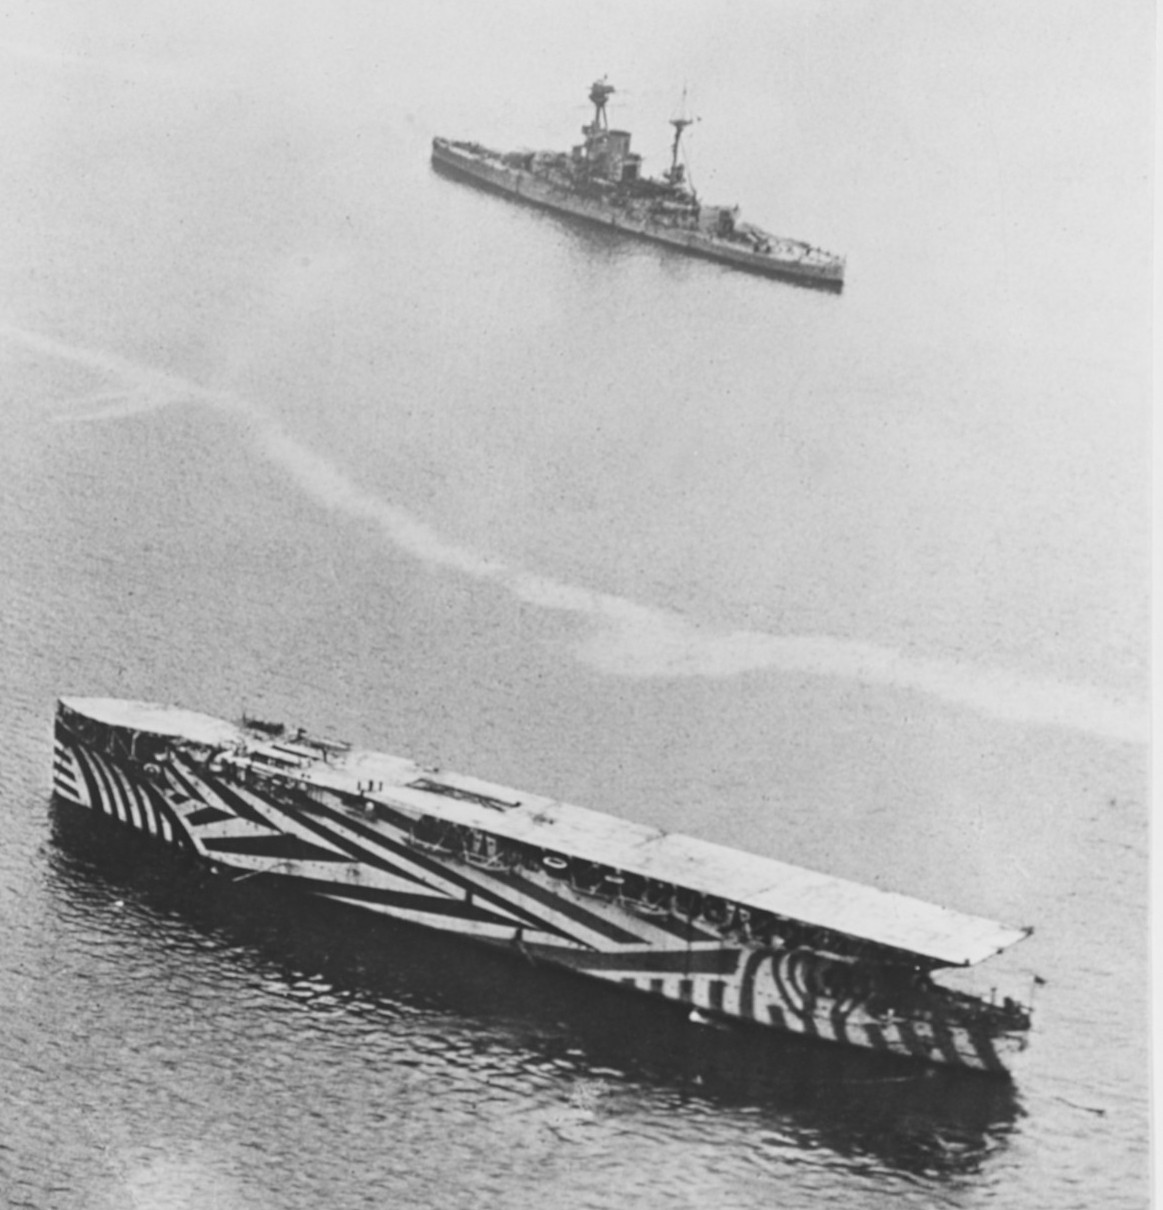 H-069-1: The Covered Wagon”: USS Langley (CV-1)